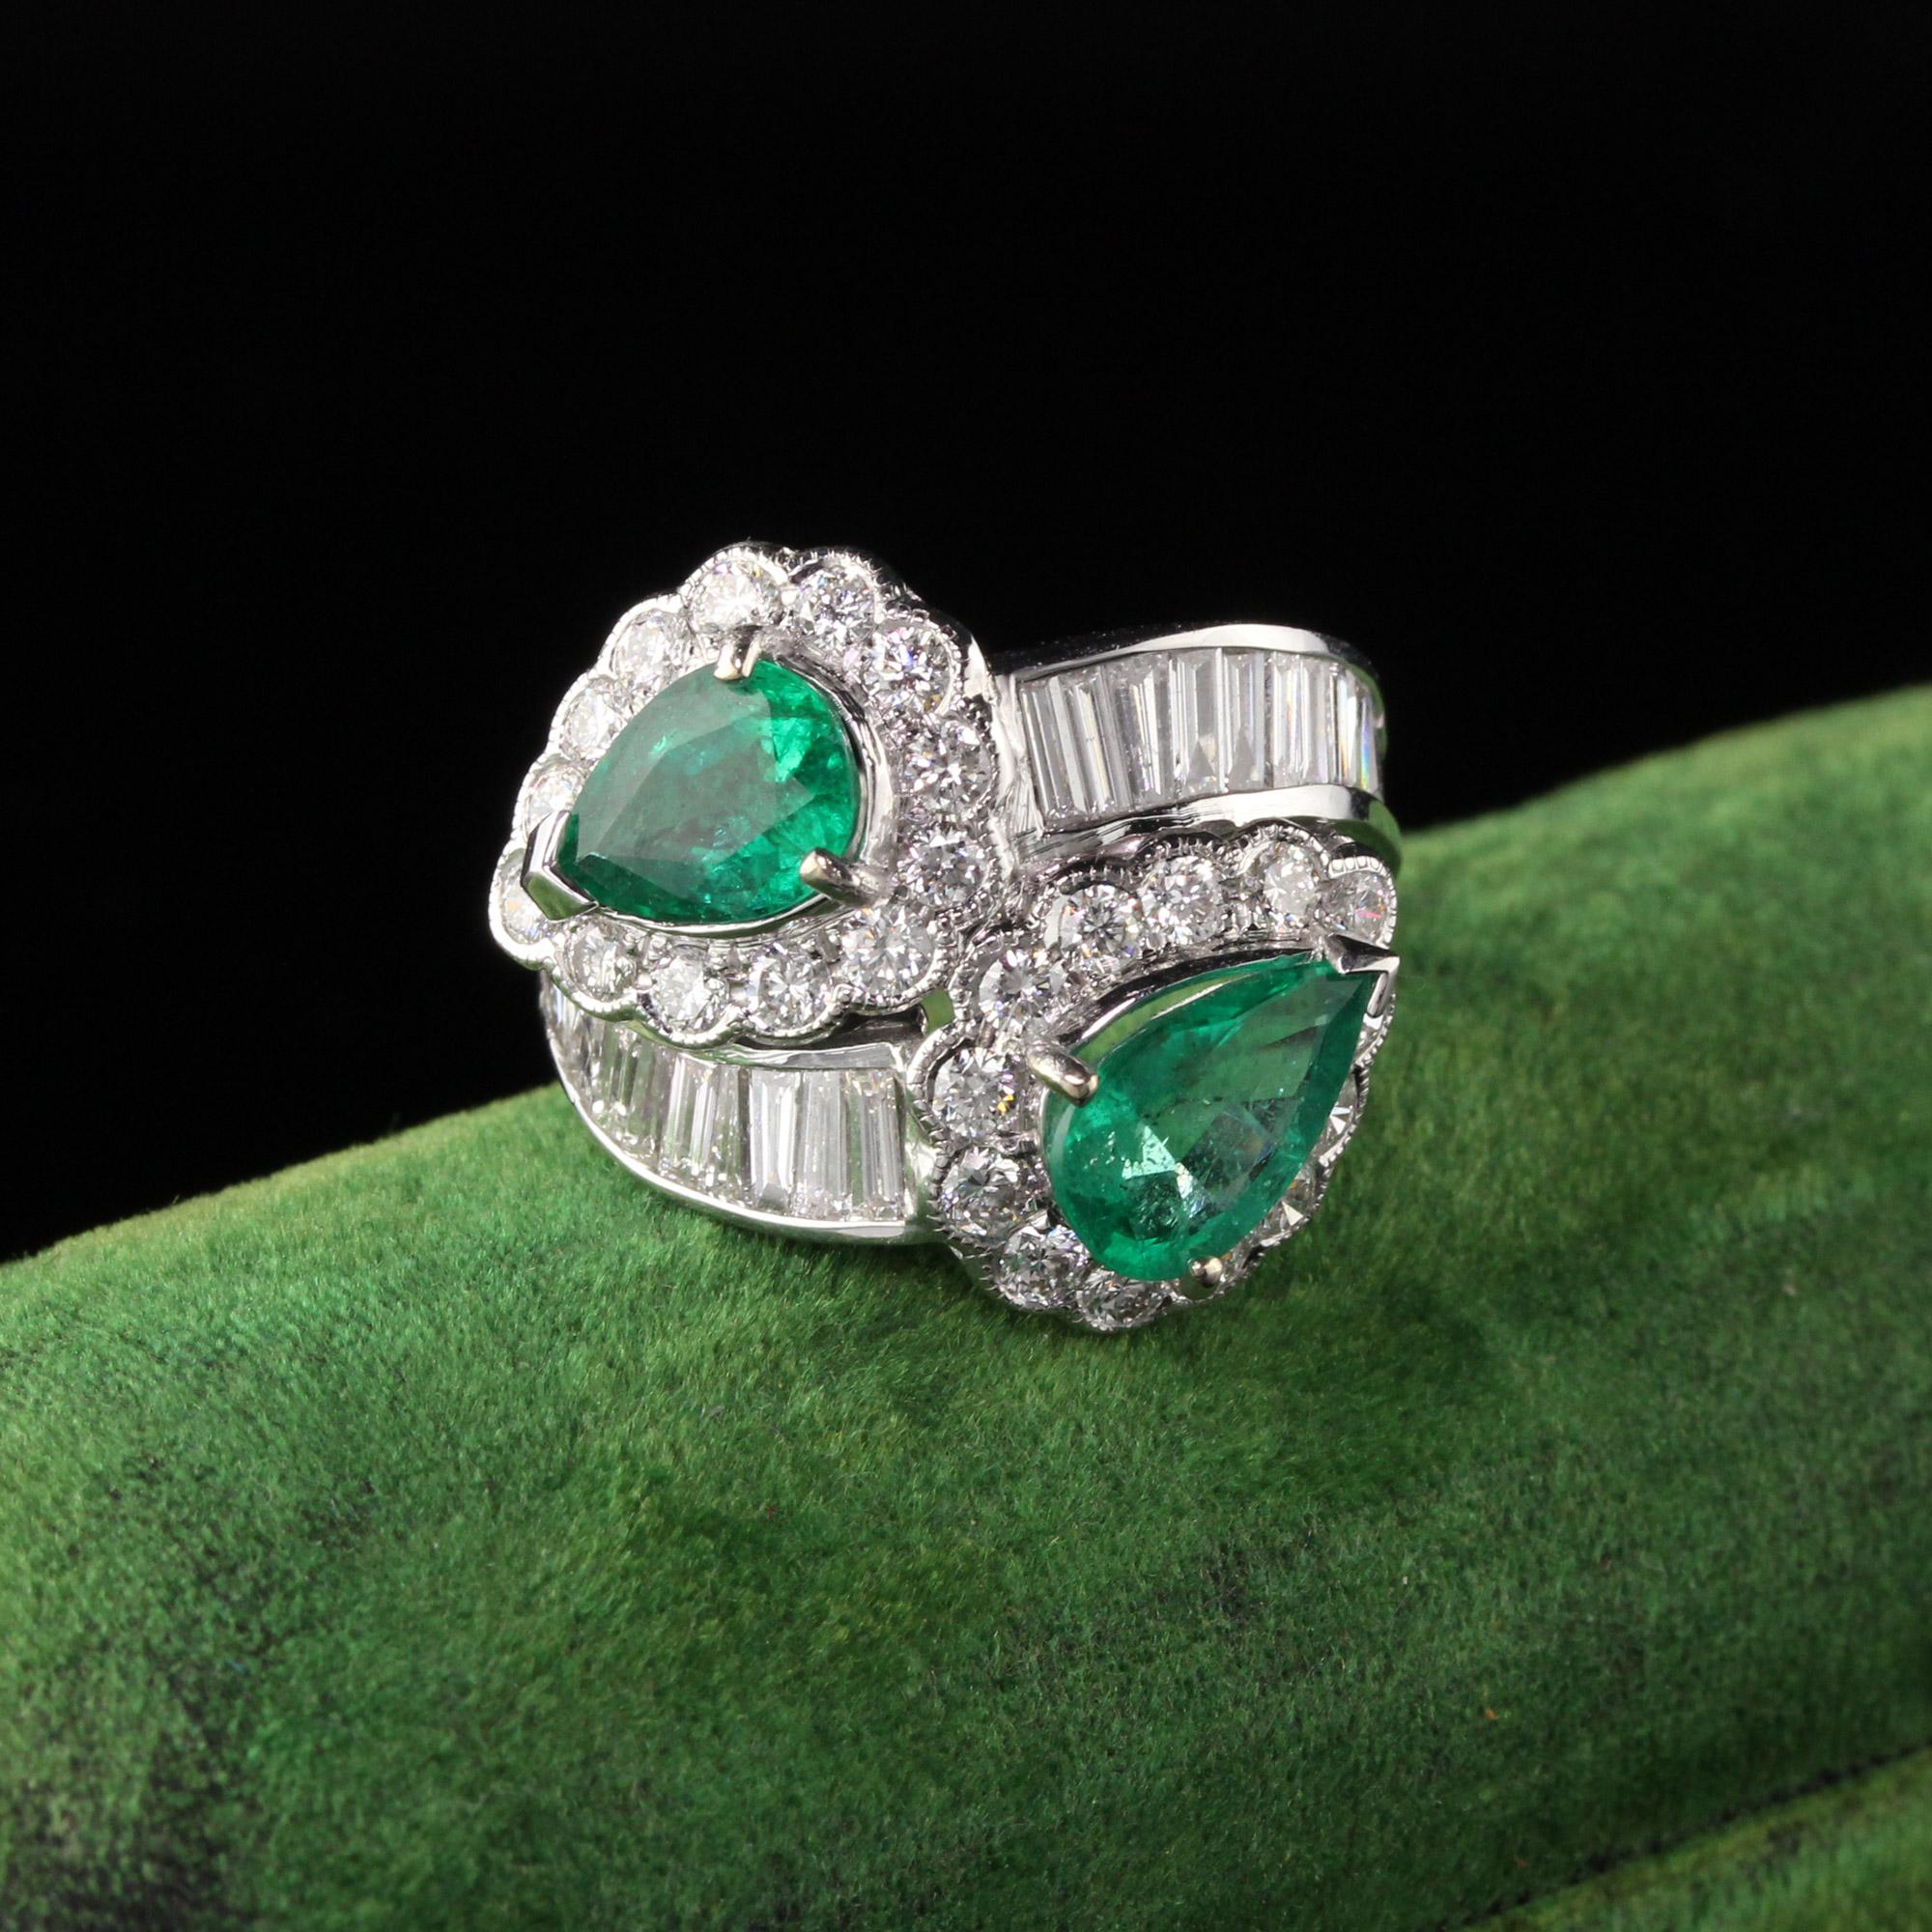 Gorgeous Toi Et Moi ring with a total of 0.99 ct Round Shape Diamonds, 0.79 ct Baguette Cut Diamonds, and a total of 2.92 ct of Emeralds.

Item #RXT-01469-R

Metal: 18K White Gold

Weight: 8.5 Grams

Round Shape Diamond Weight: 0.99 cts

Baguette